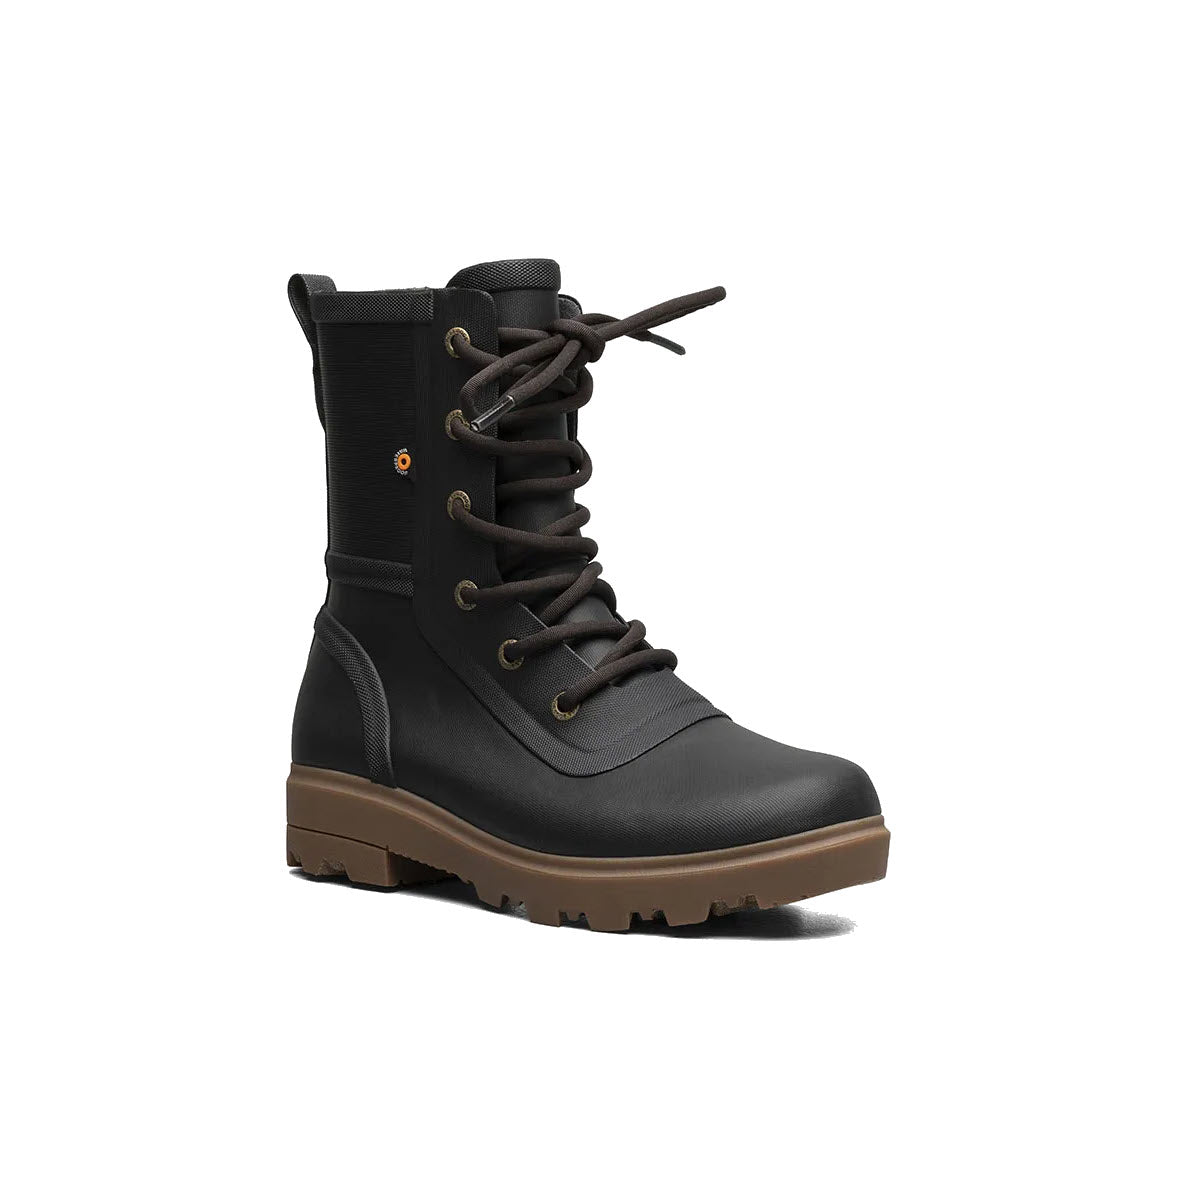 Black lace-up boot with a high top design and brown rubber sole, featuring waterproof Bogs Holly Rain Lace Tall Black boots technology, displayed against a white background.